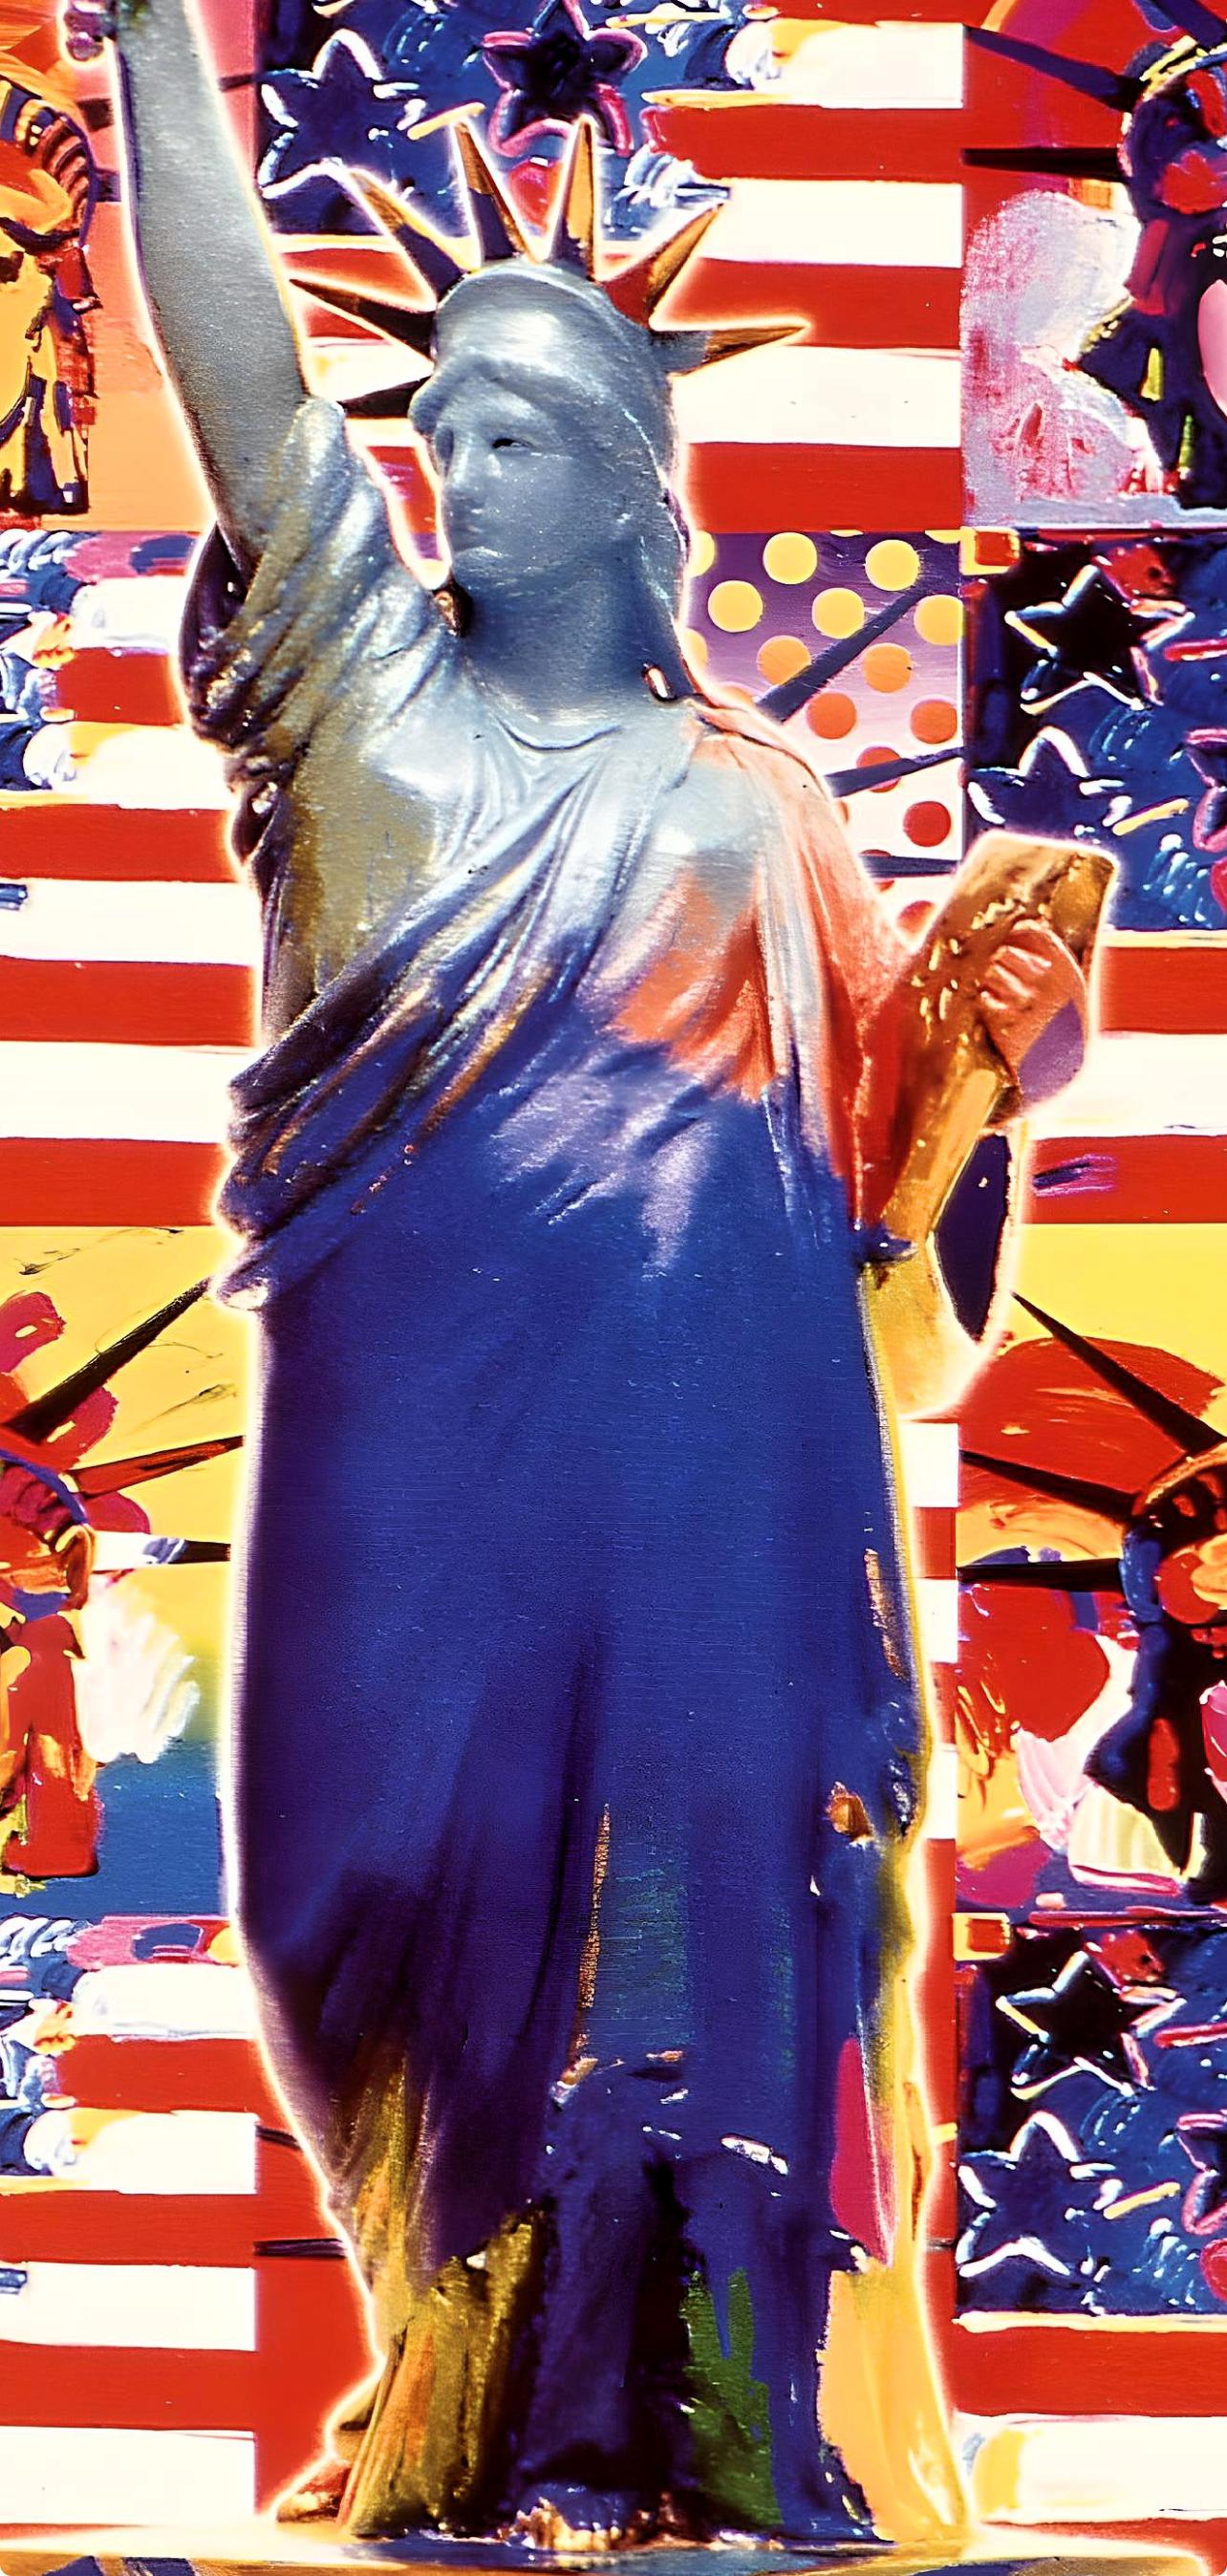 Artist: Peter Max (1937)
Title: God Bless America
Year: 2002
Edition: 201/300, plus proofs
Medium: Lithograph on archival paper
Size: 12.5 x 9 inches
Condition: Excellent
Inscription: Signed and numbered by the artist.
Notes: Published by Via